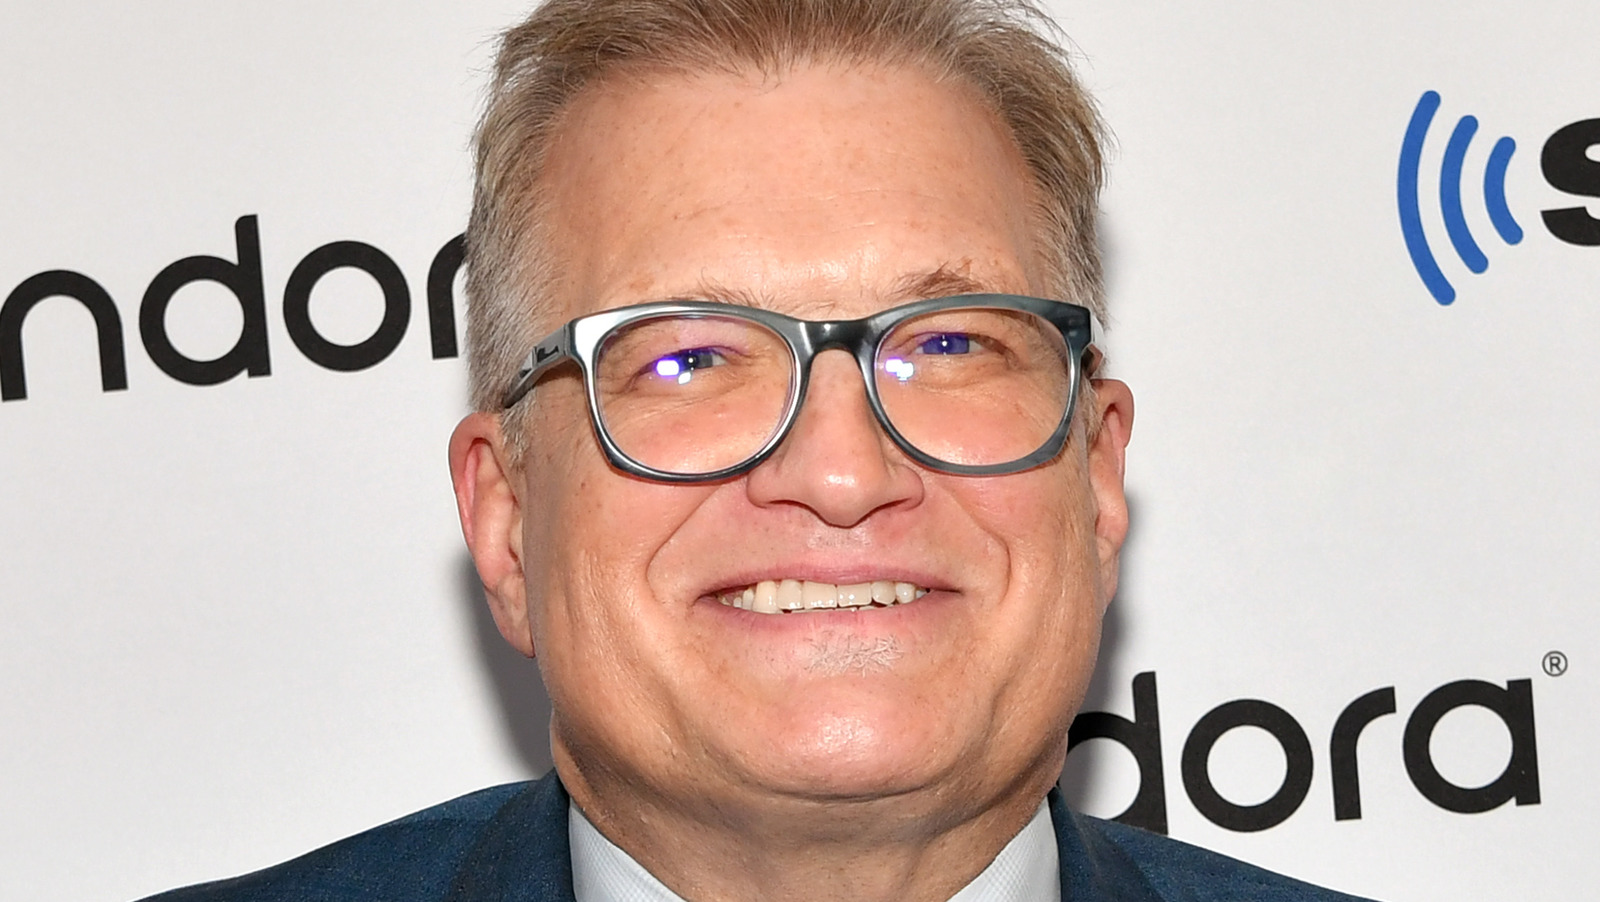 Drew Carey recalled an incident from his second season hosting The Price is...